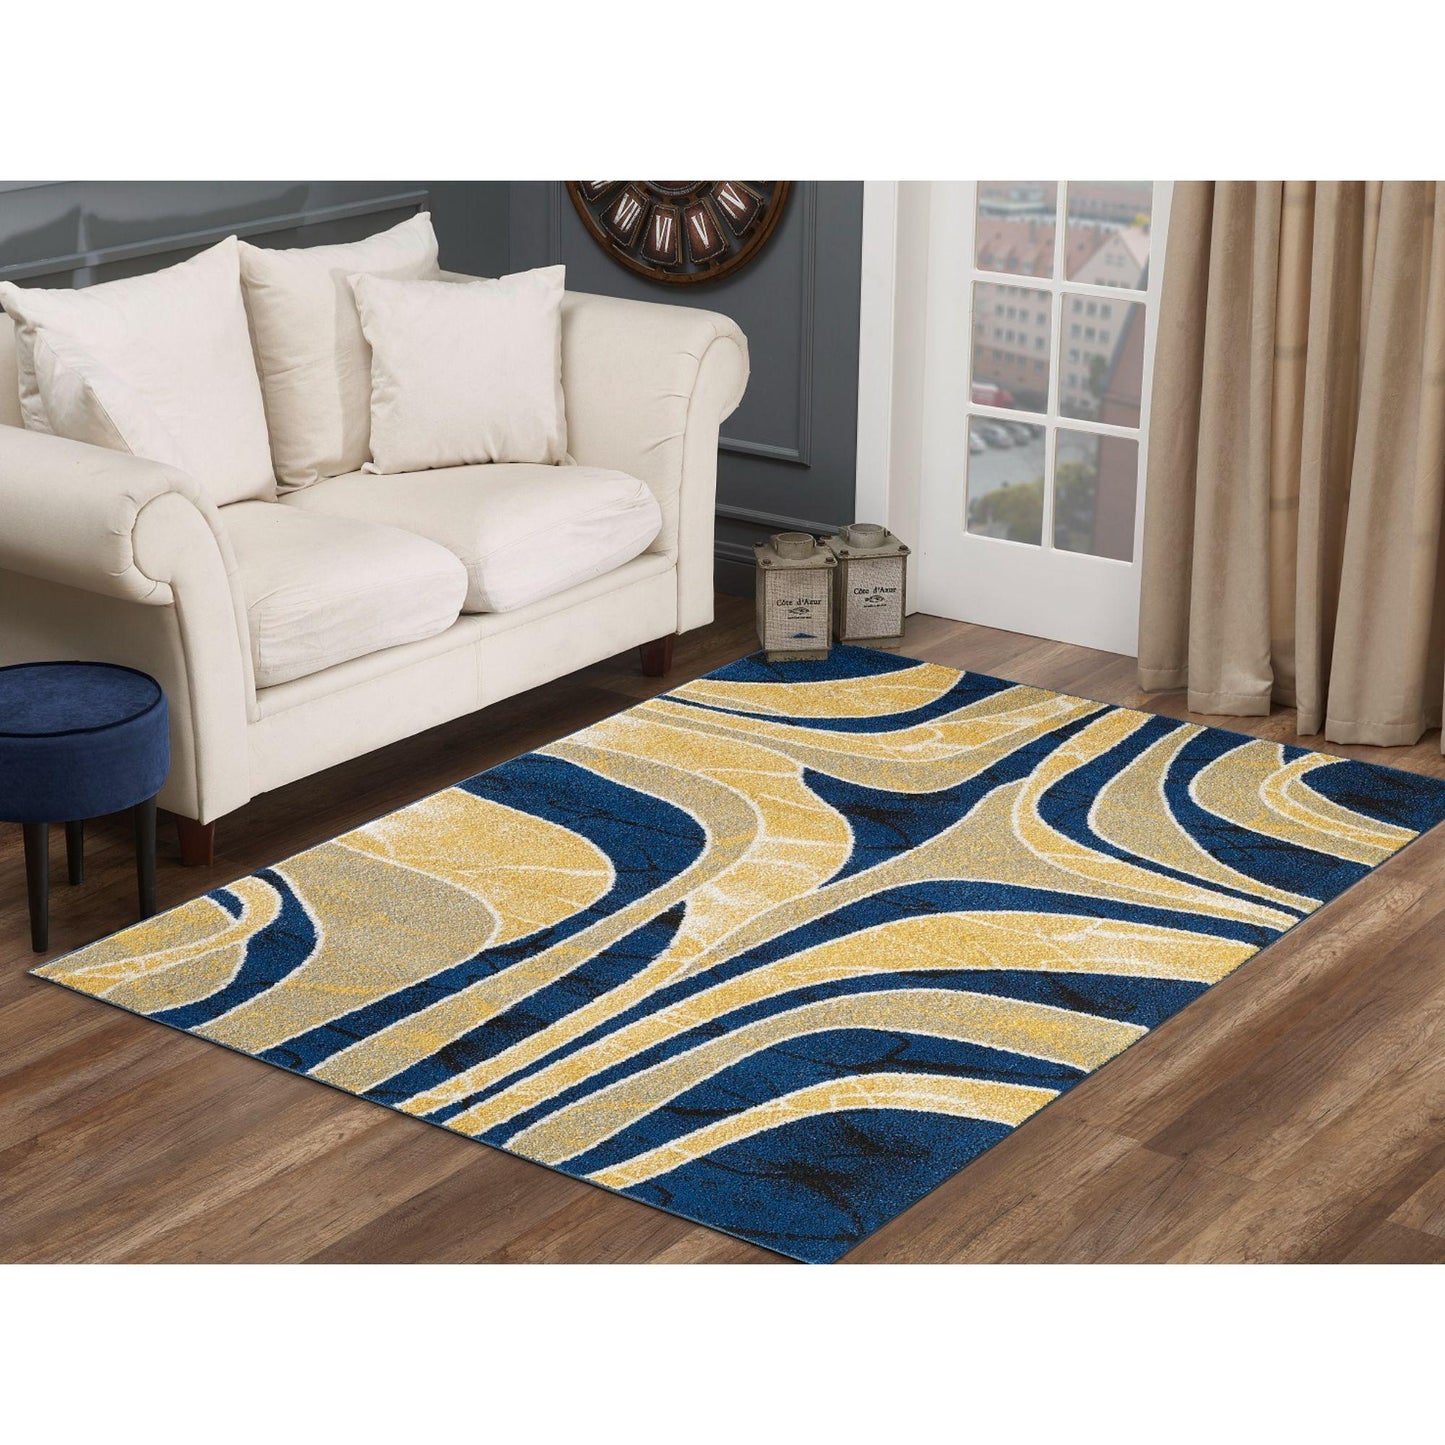 5' x 7' Yellow and Blue Graphic Rectangular Area Throw Rug